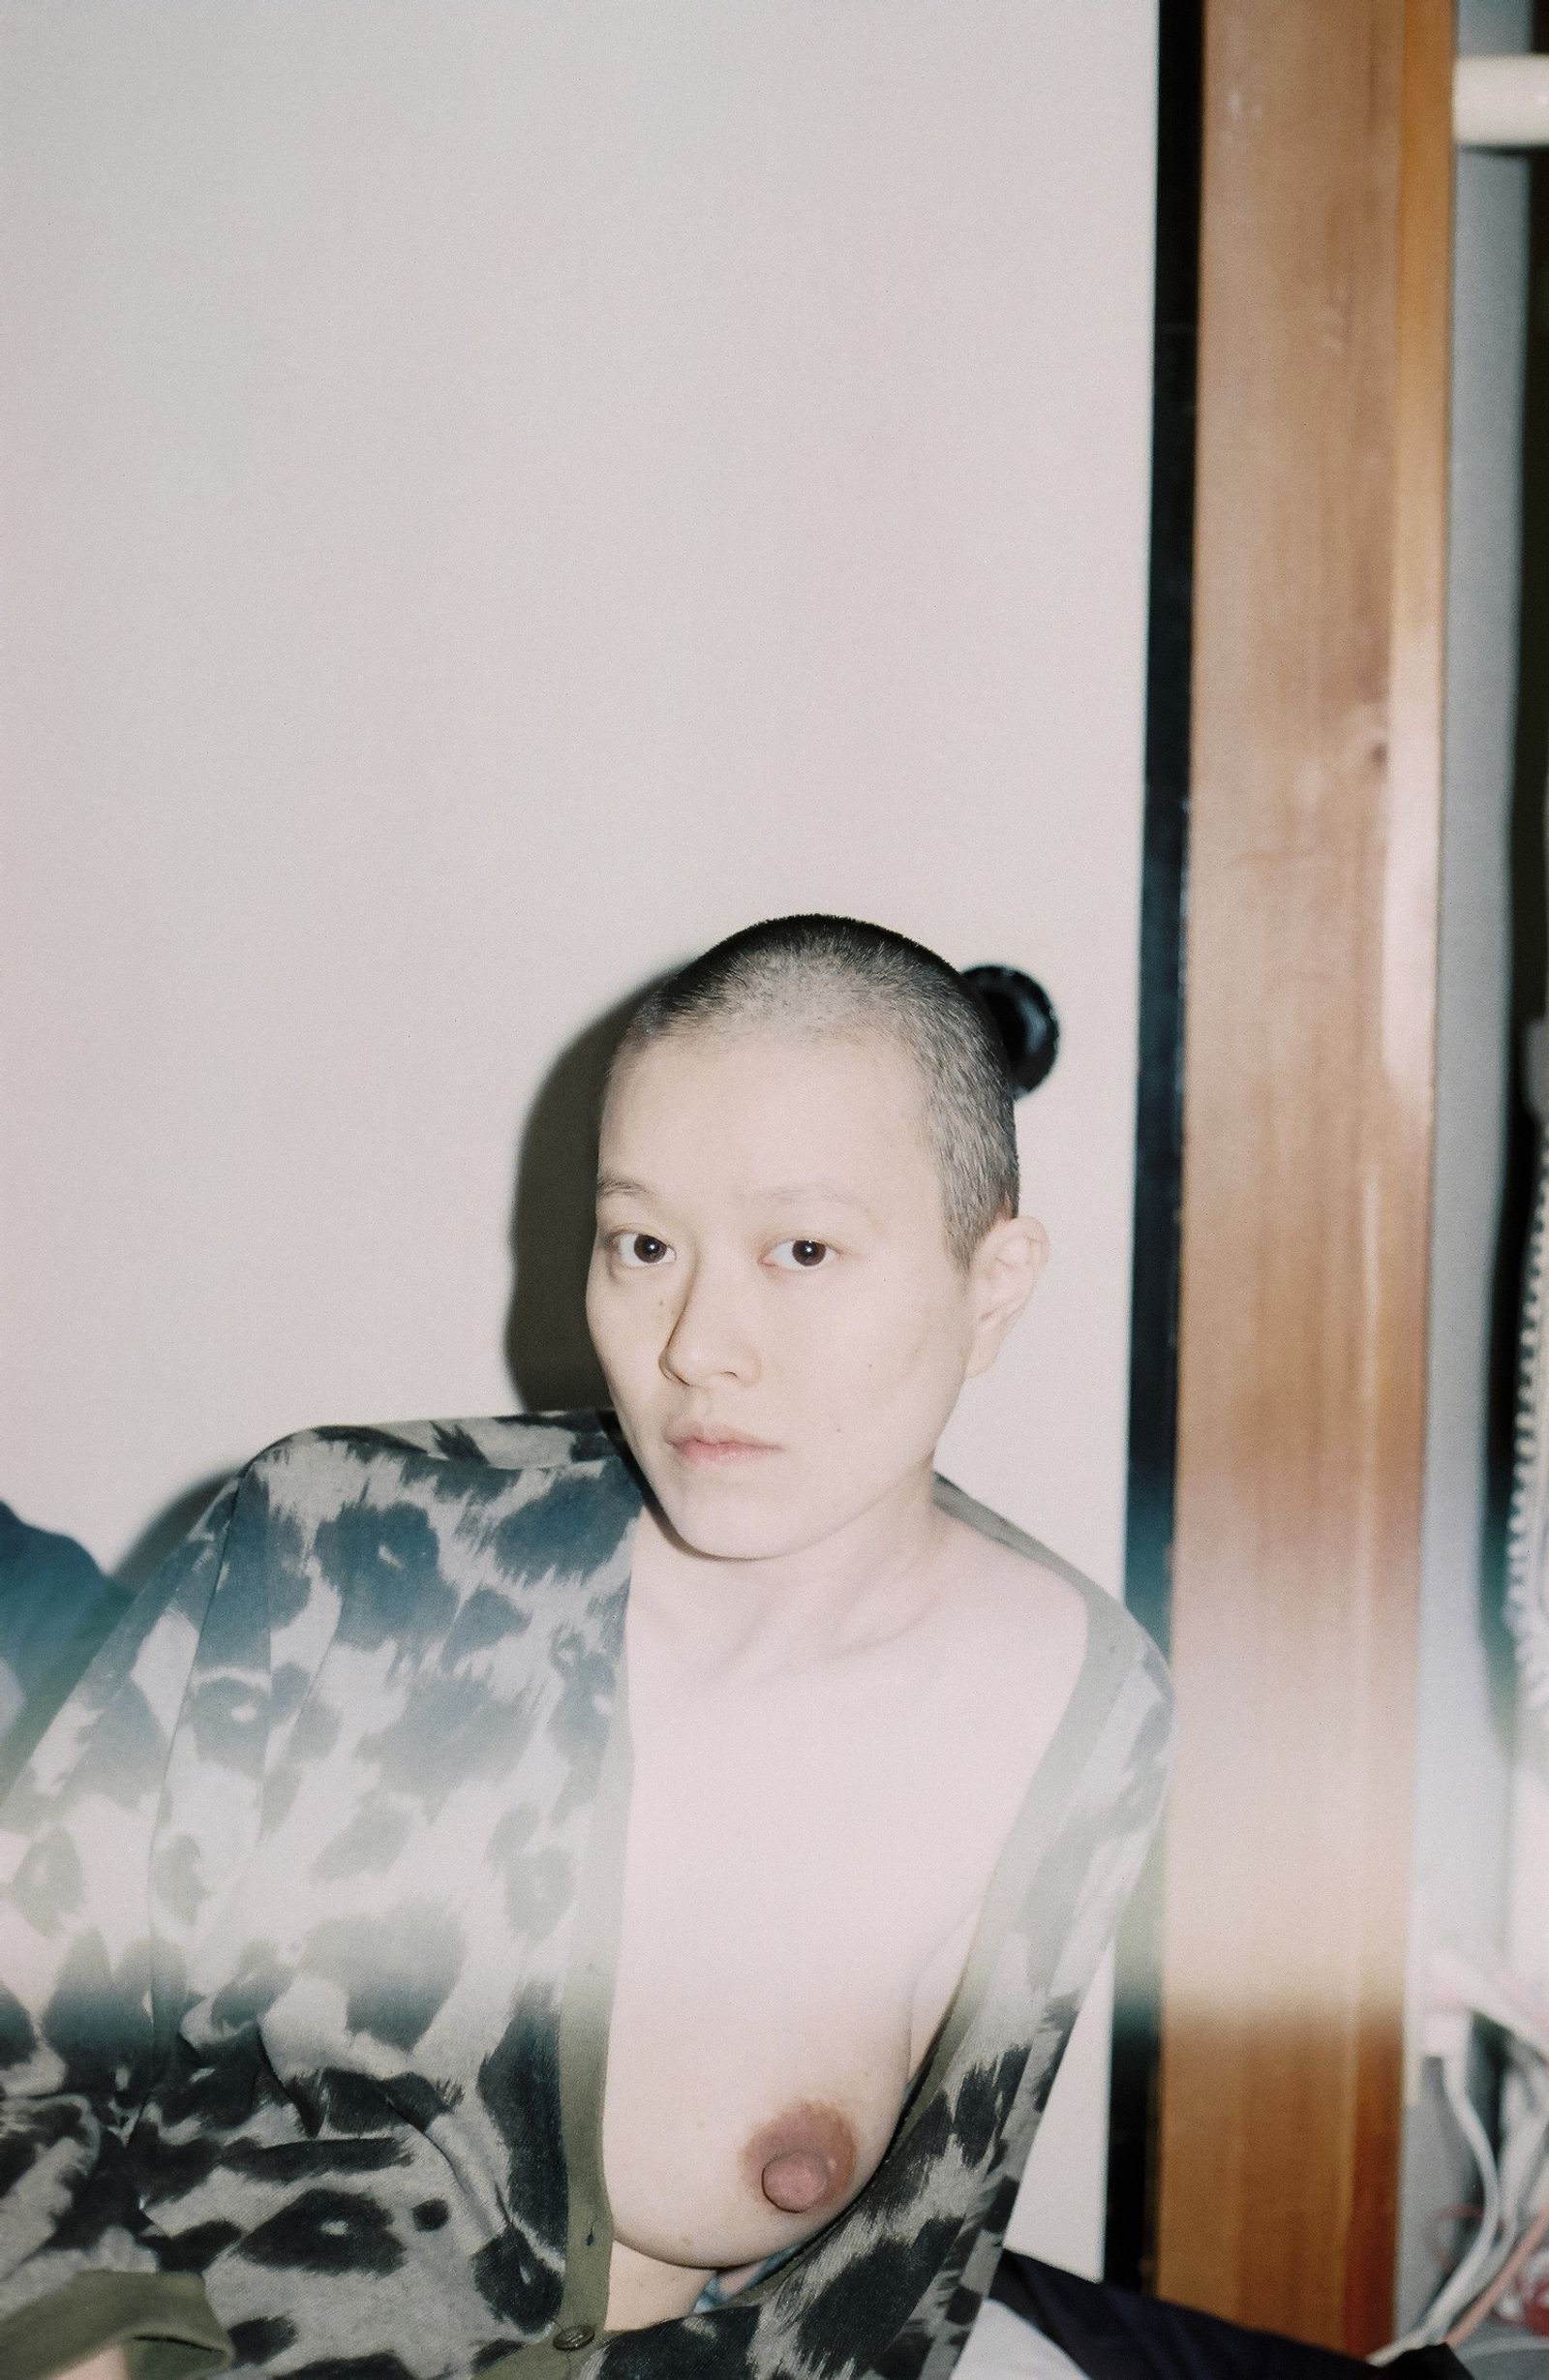 © Yuan Yao Yuan - Image from the 1 2 3 2 1 photography project